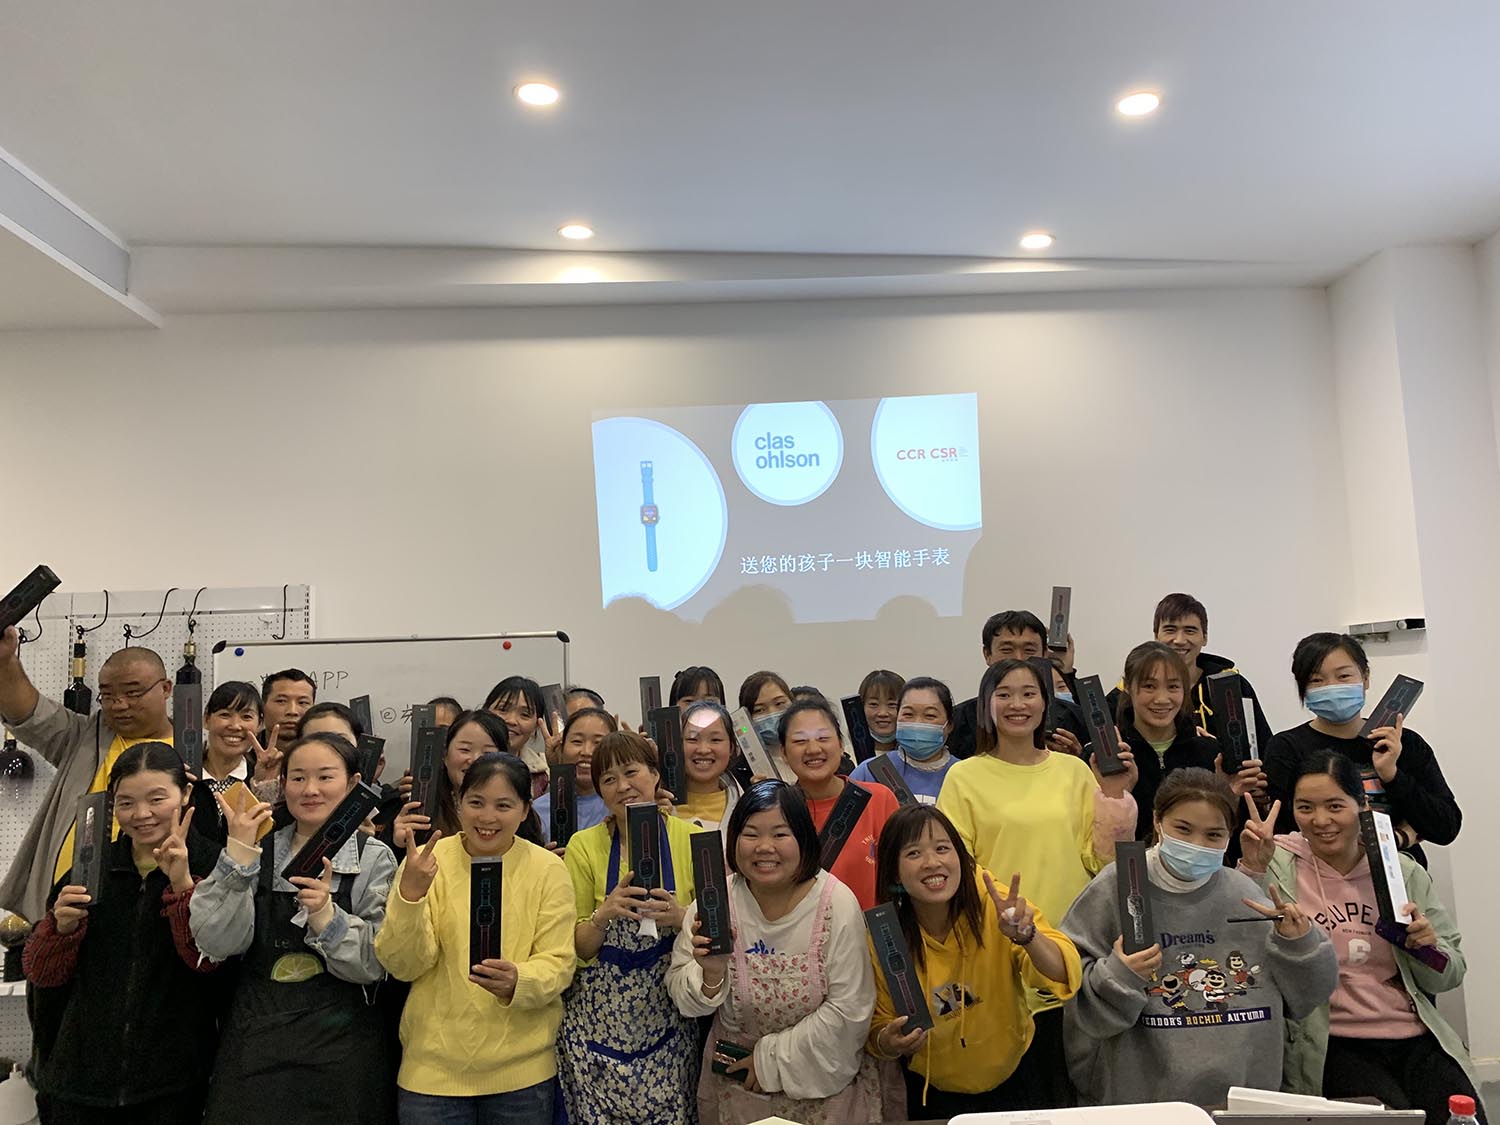 WeCare Migrant Parent Support Programme for Clas Ohlson in China